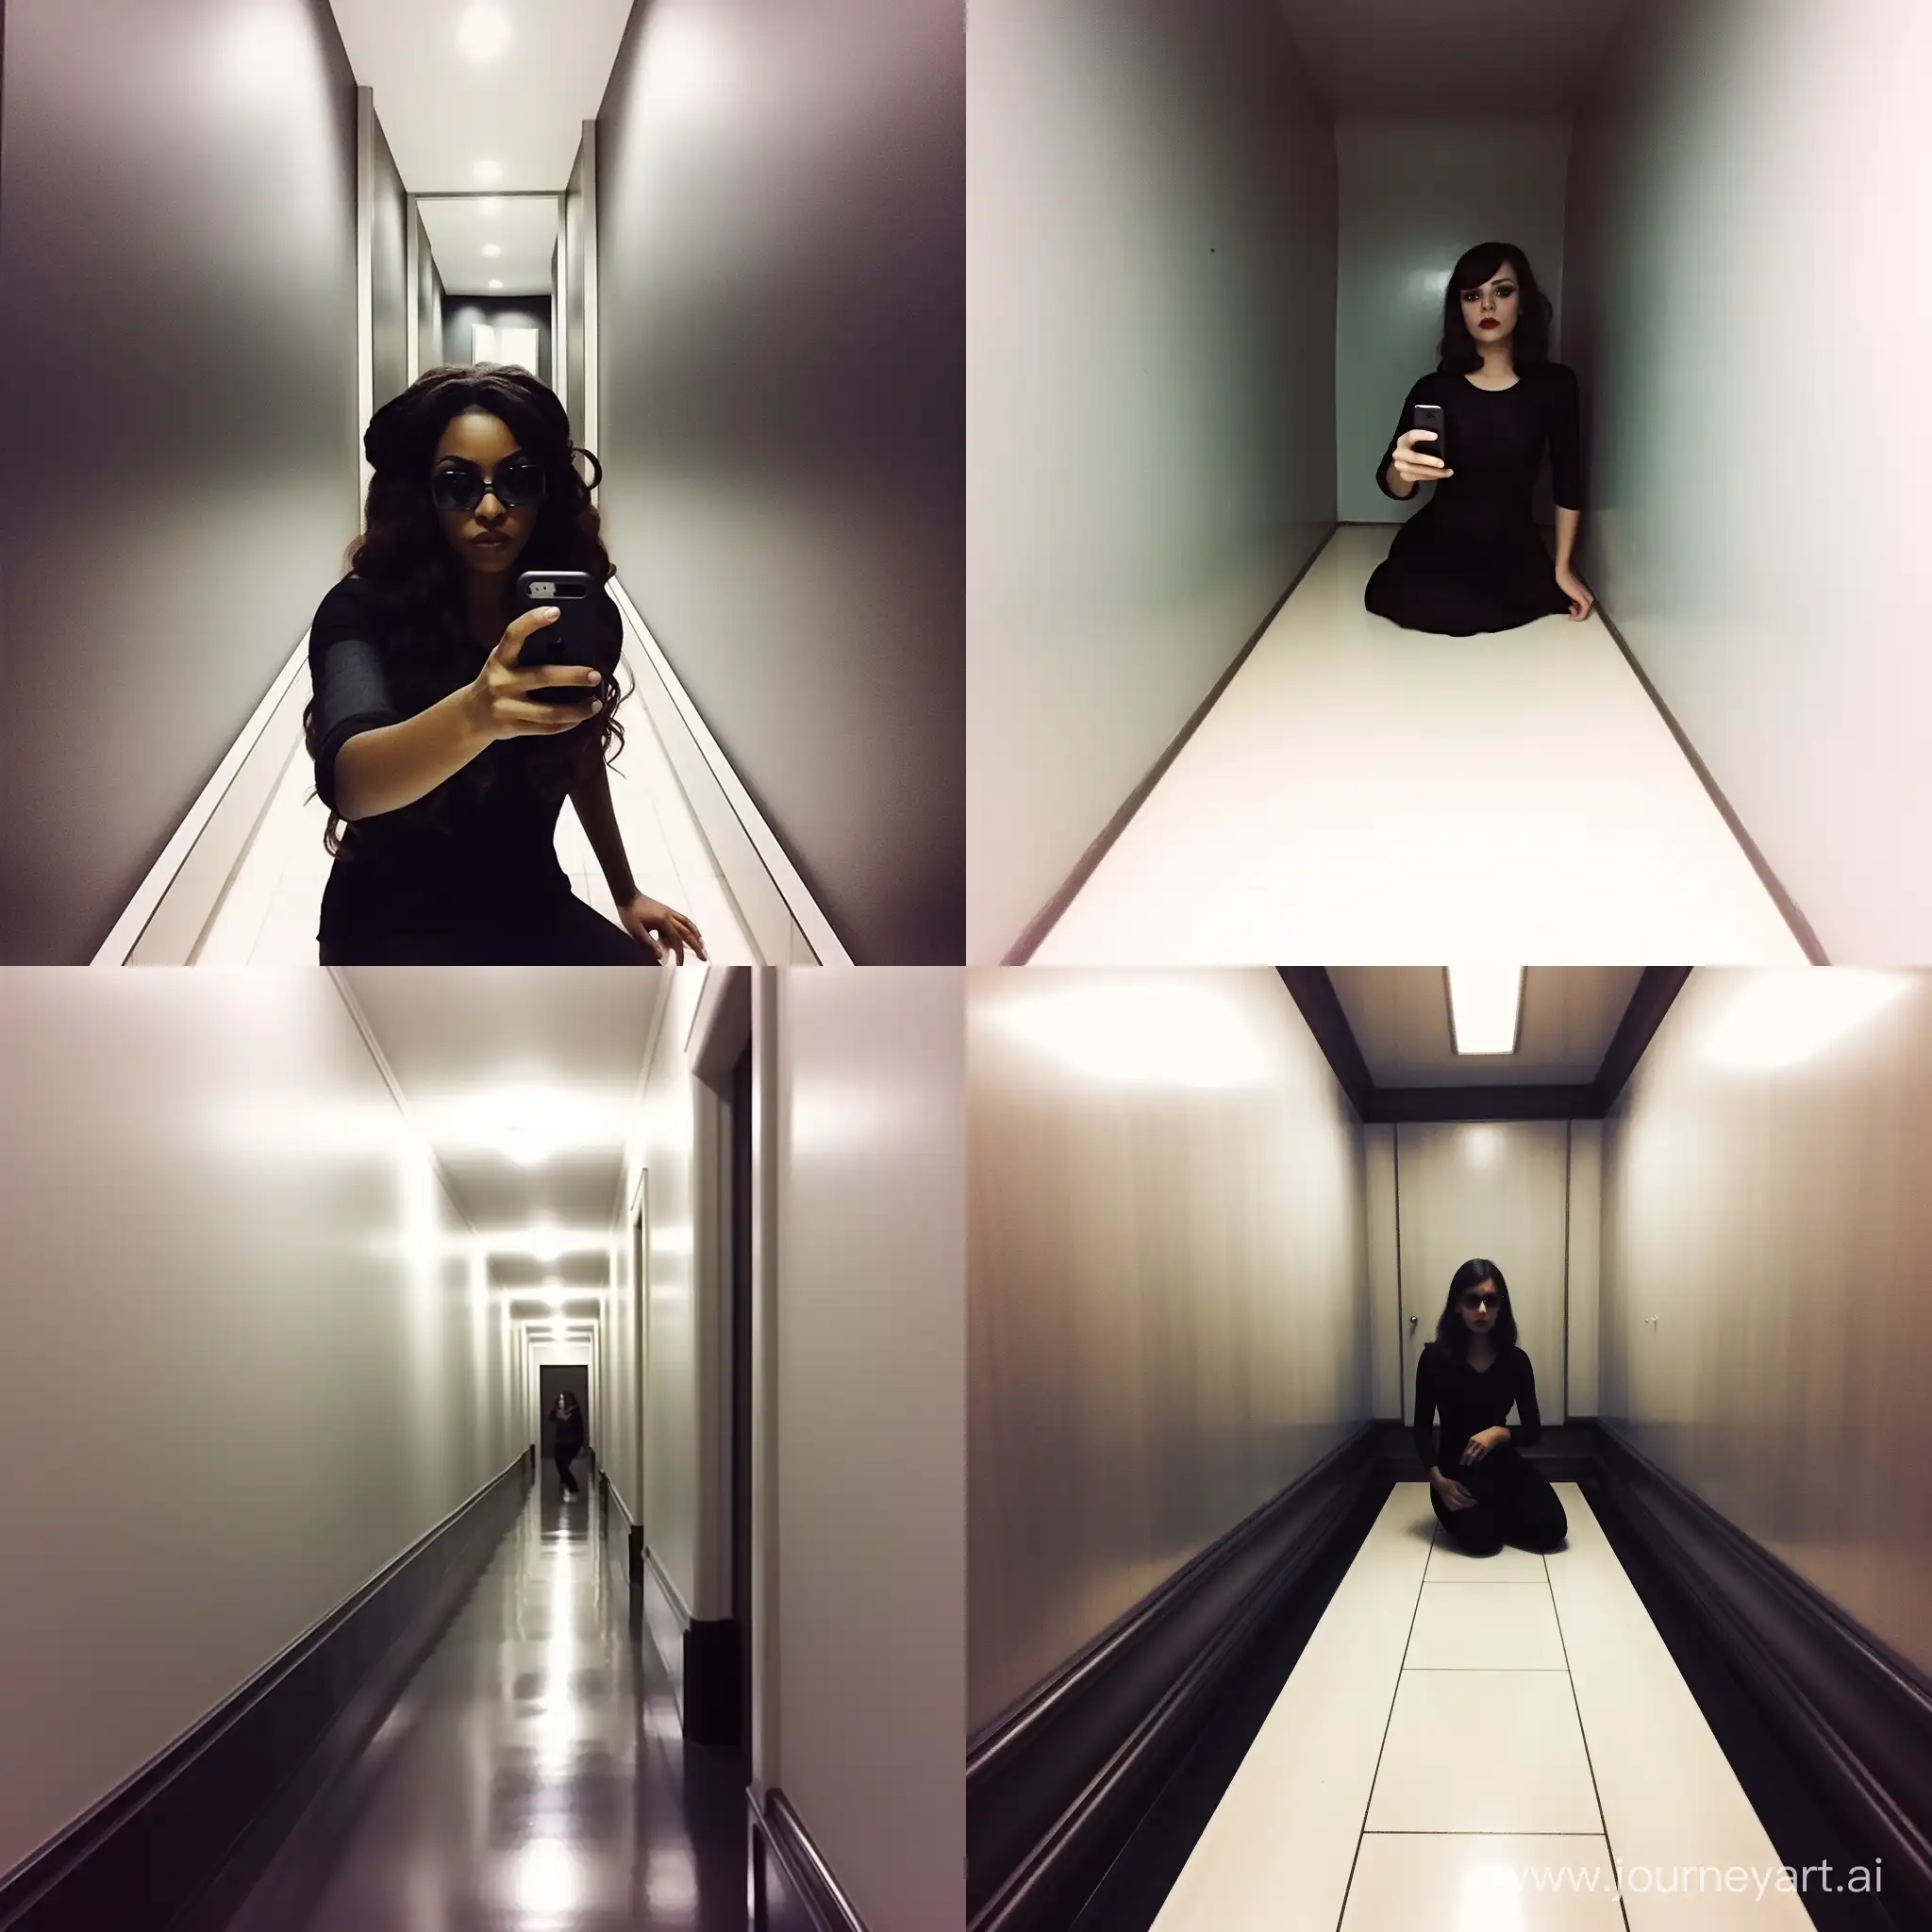 LowQuality-Phone-Selfie-of-Stylish-Woman-in-Black